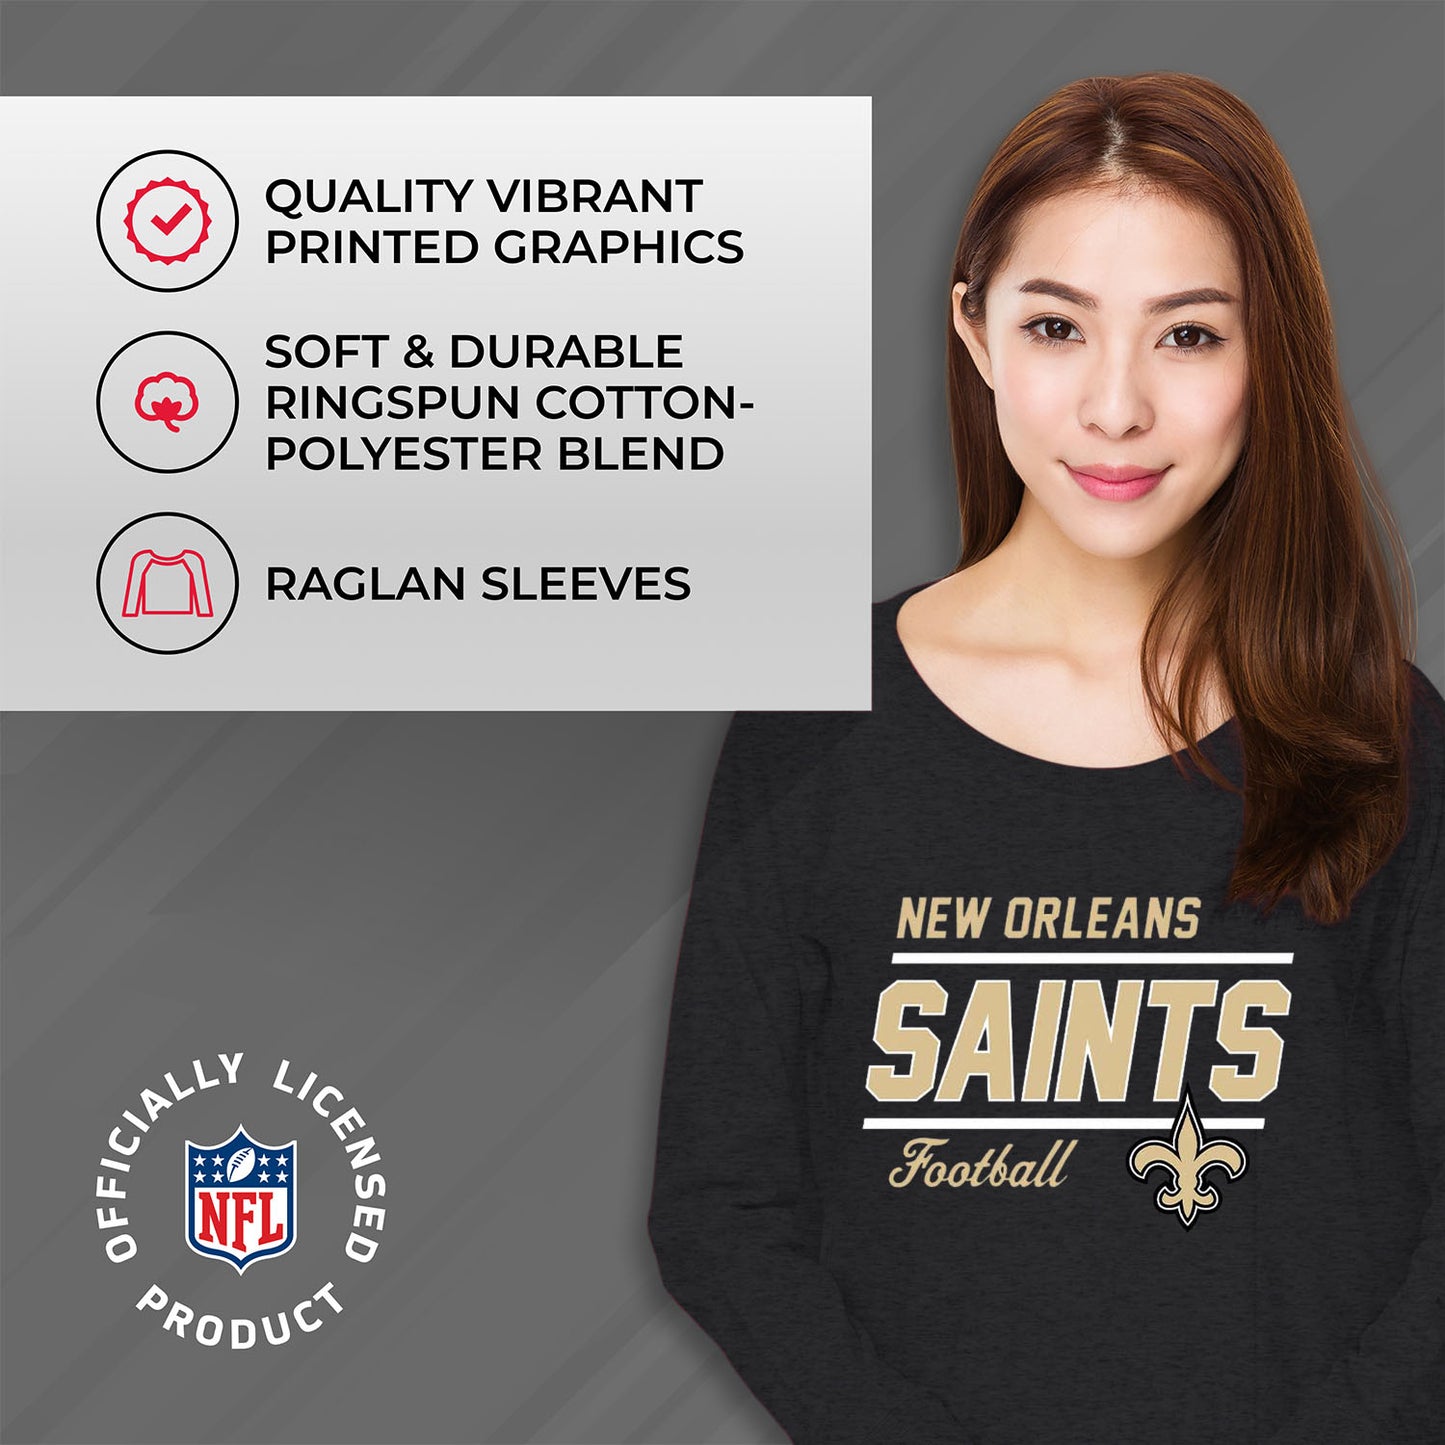 New Orleans Saints NFL Womens Crew Neck Light Weight - Charcoal